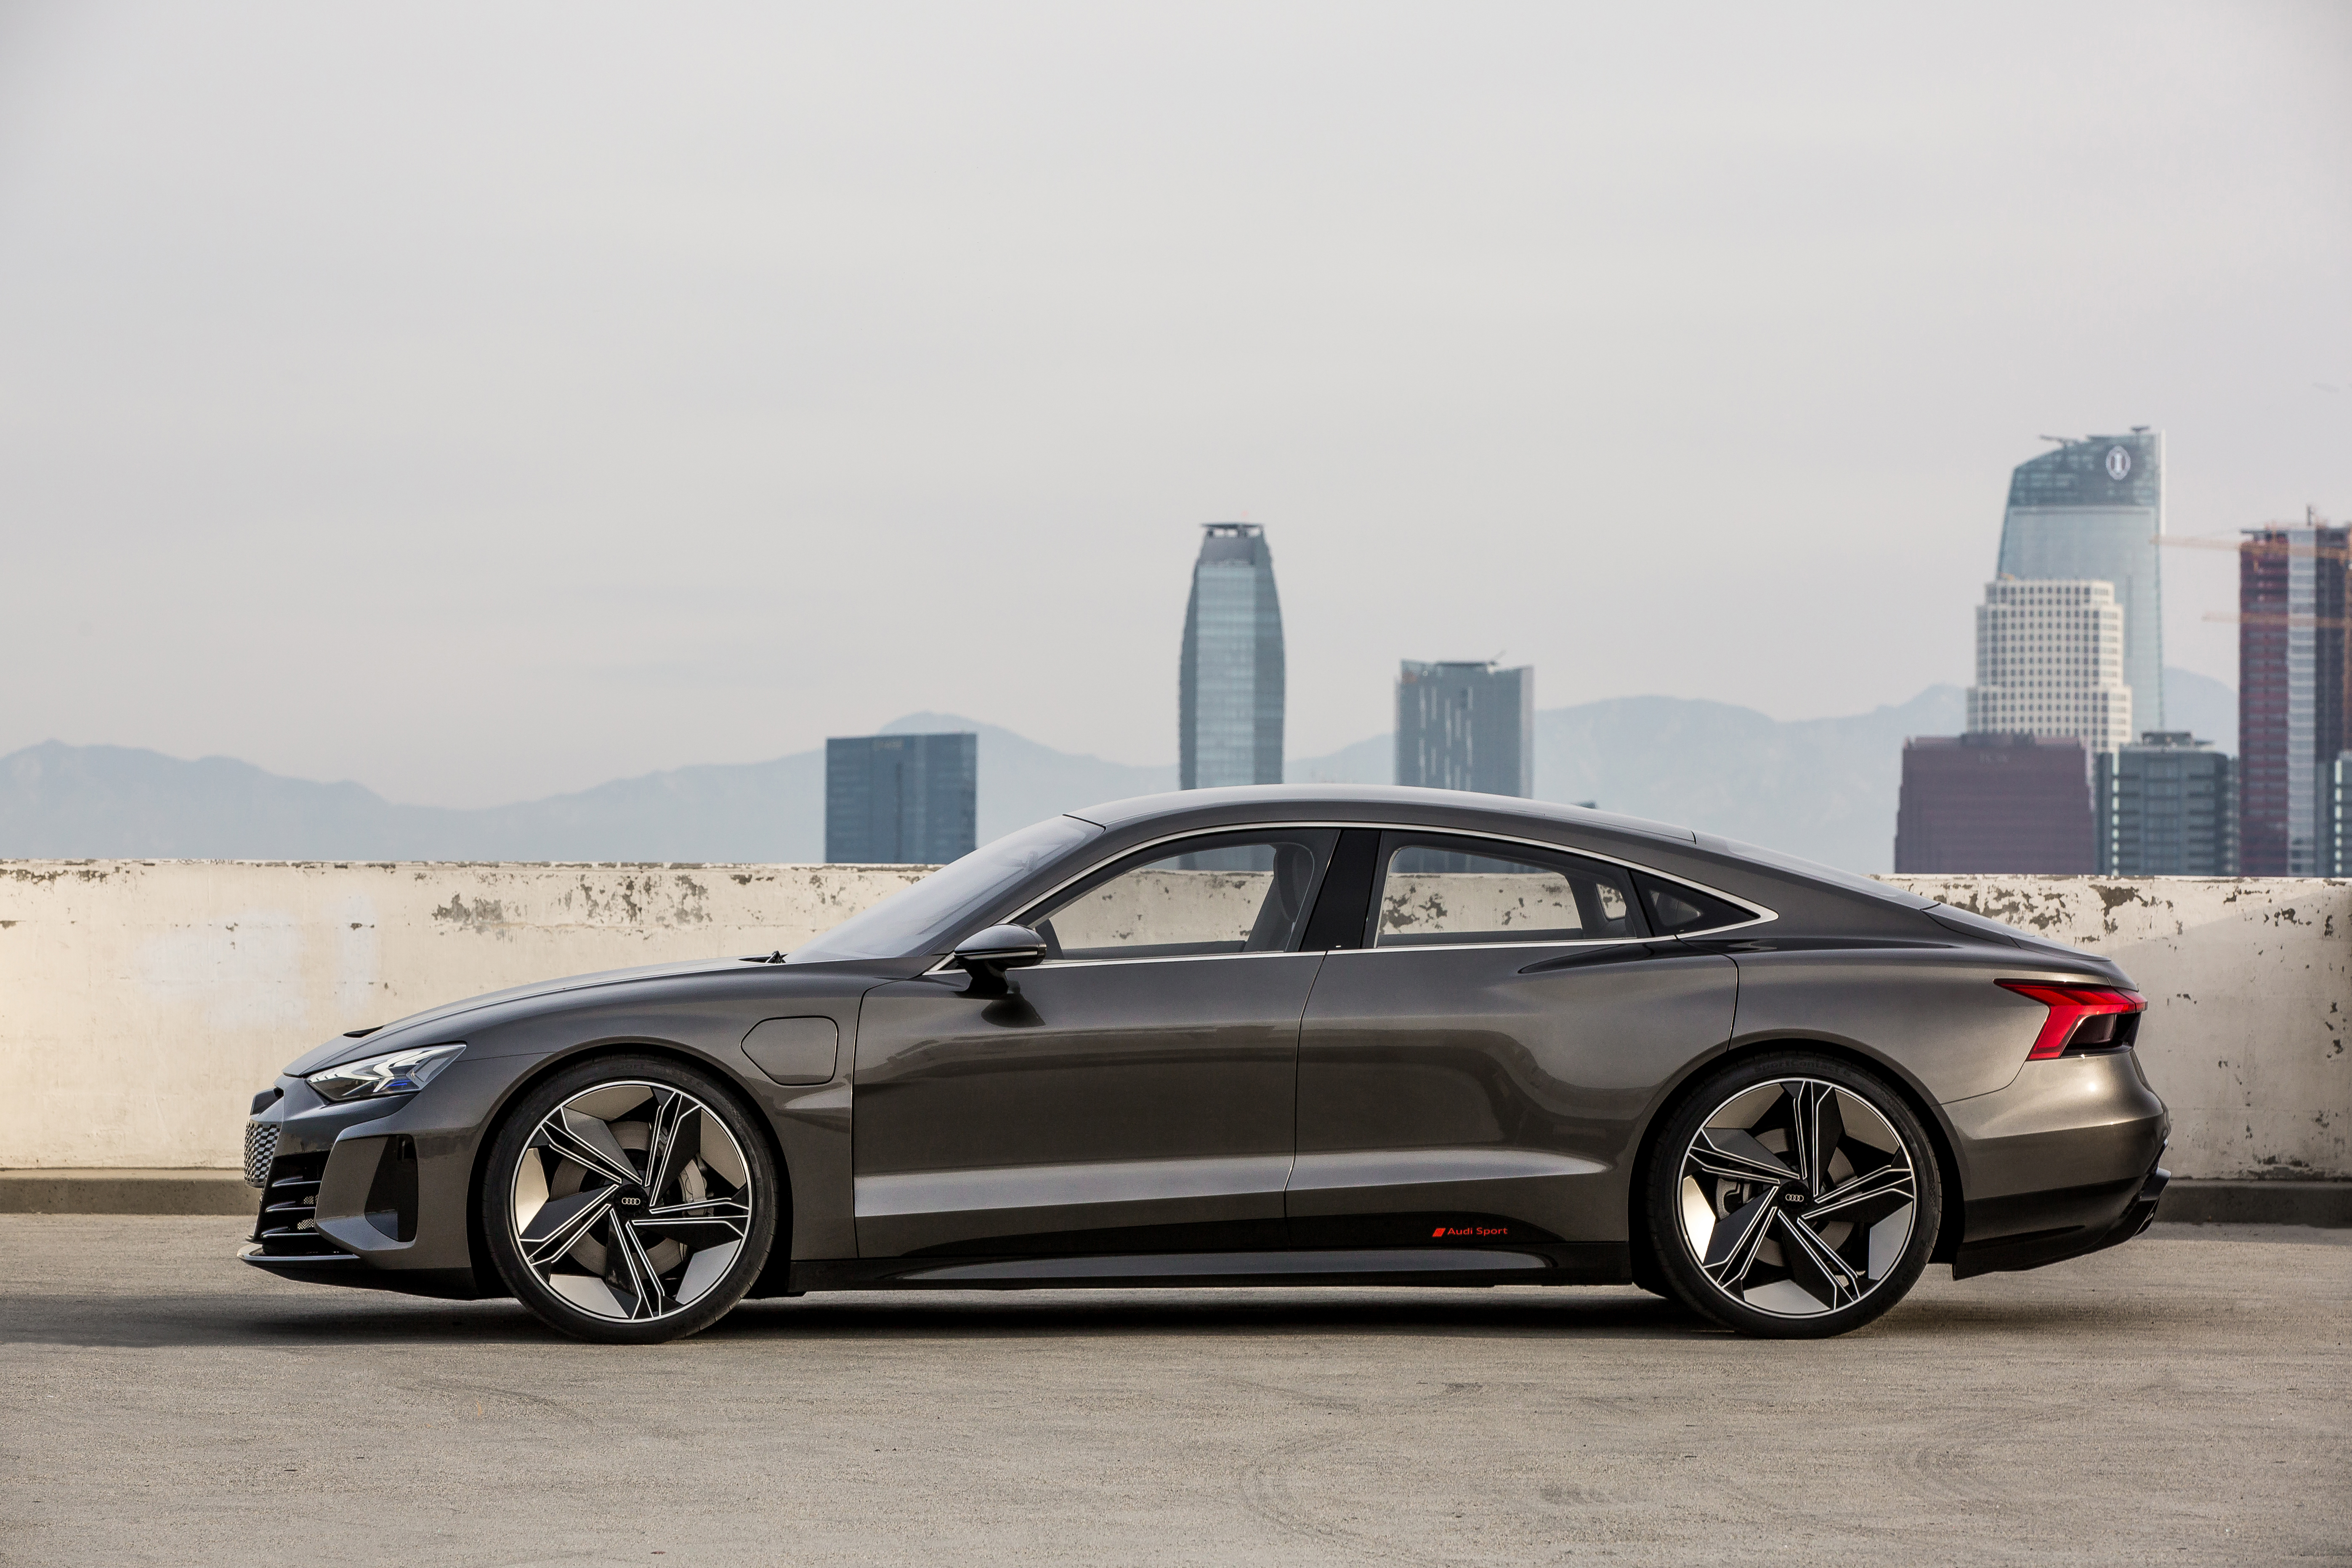 Audi S E Tron Gt Concept Is An All Electric Sedan With Some